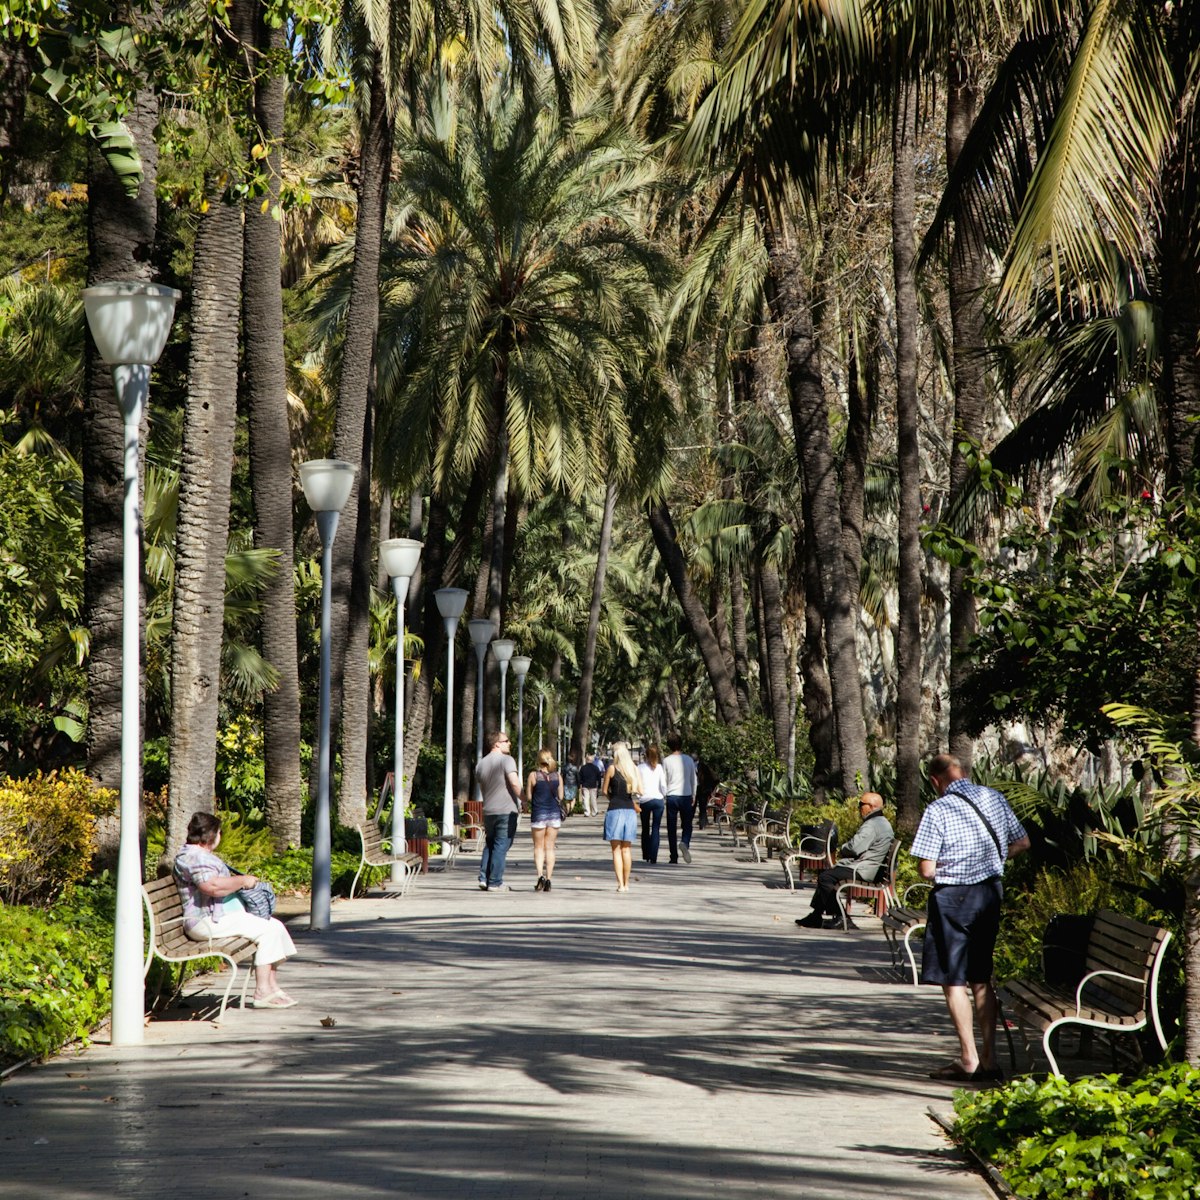 Pedestrians Walking Down A Path Lined With Palm Trees